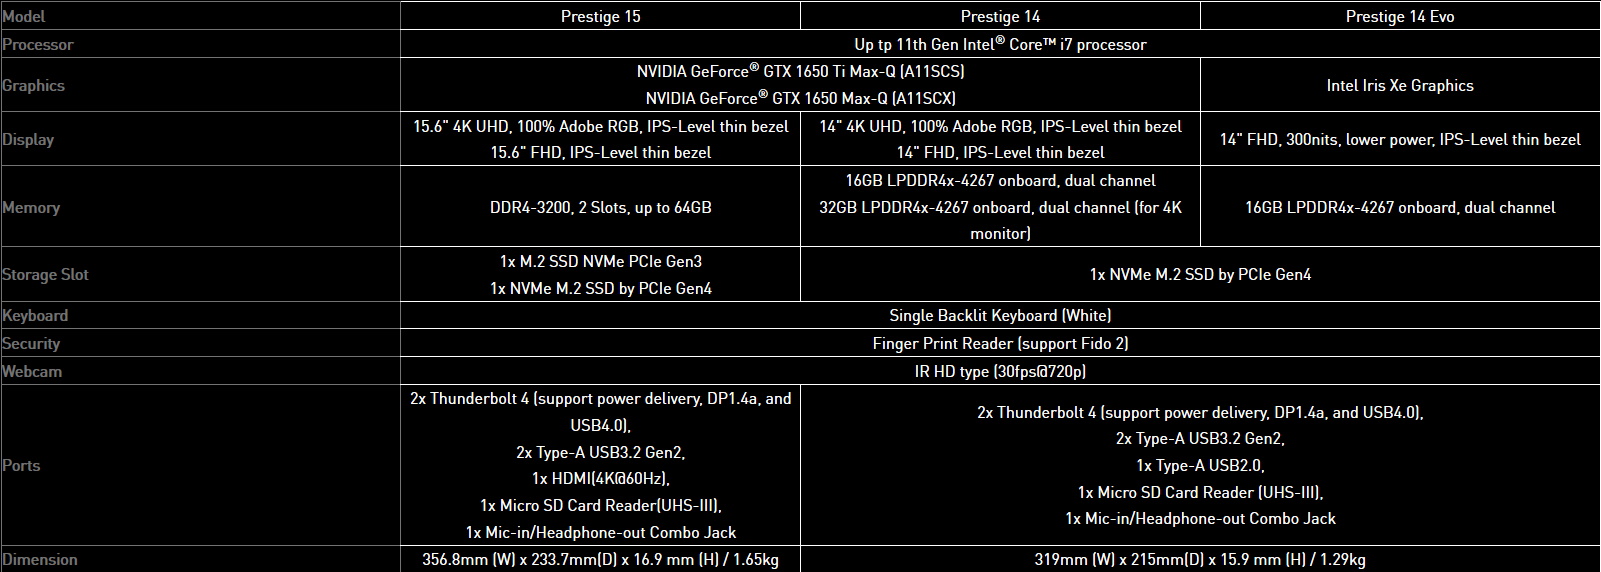 MSI Announces All-New Business Laptops With 11th Gen Tiger Lake CPUs And Optional GTX 1650 Ti